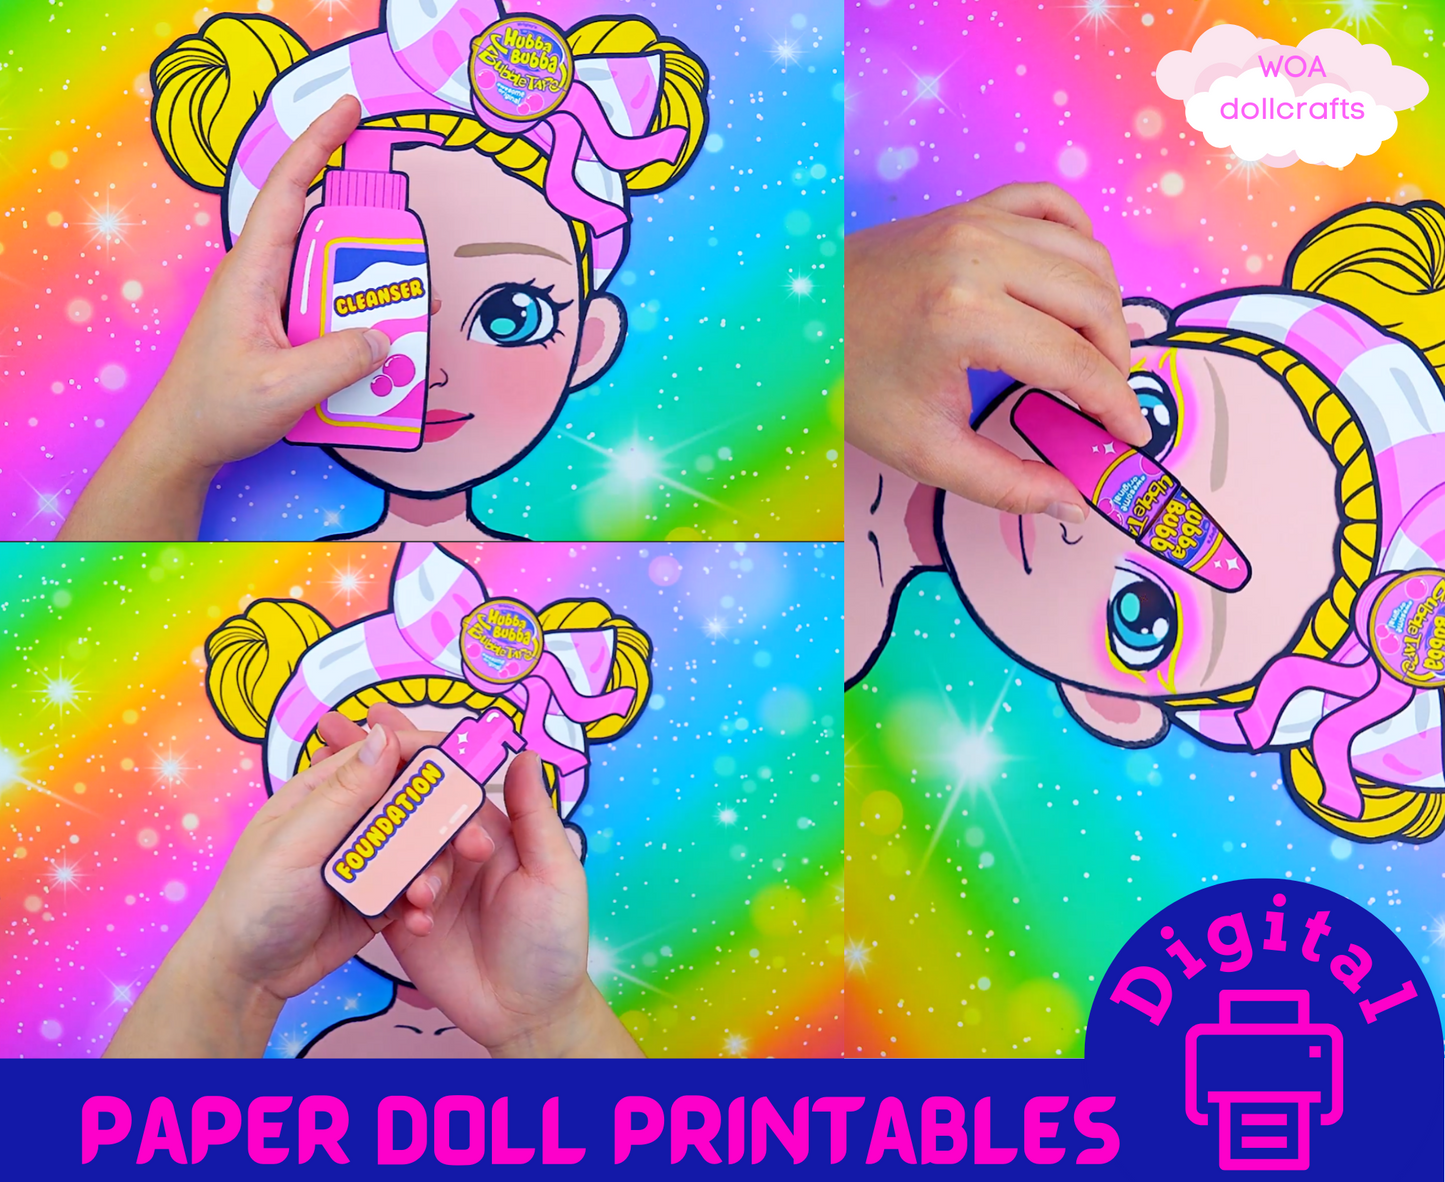 Candy make up kit printable 🍭 DIY kit for your little one - Paper doll house - Activity book for kids 🍭 Woa Doll Crafts